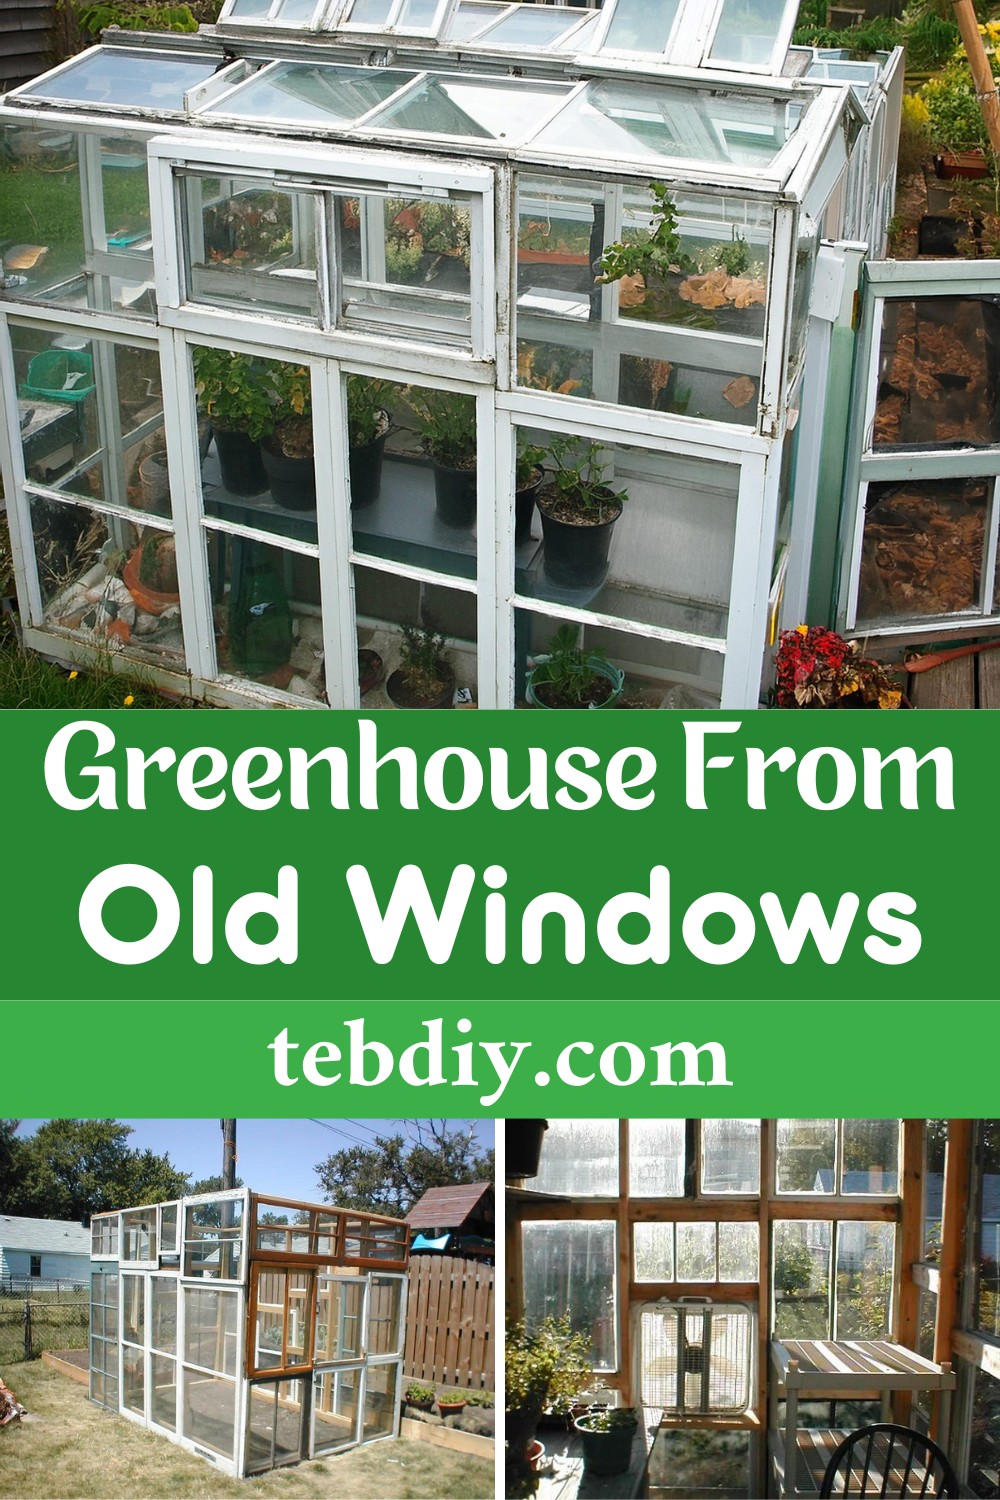 Greenhouse From Old Windows